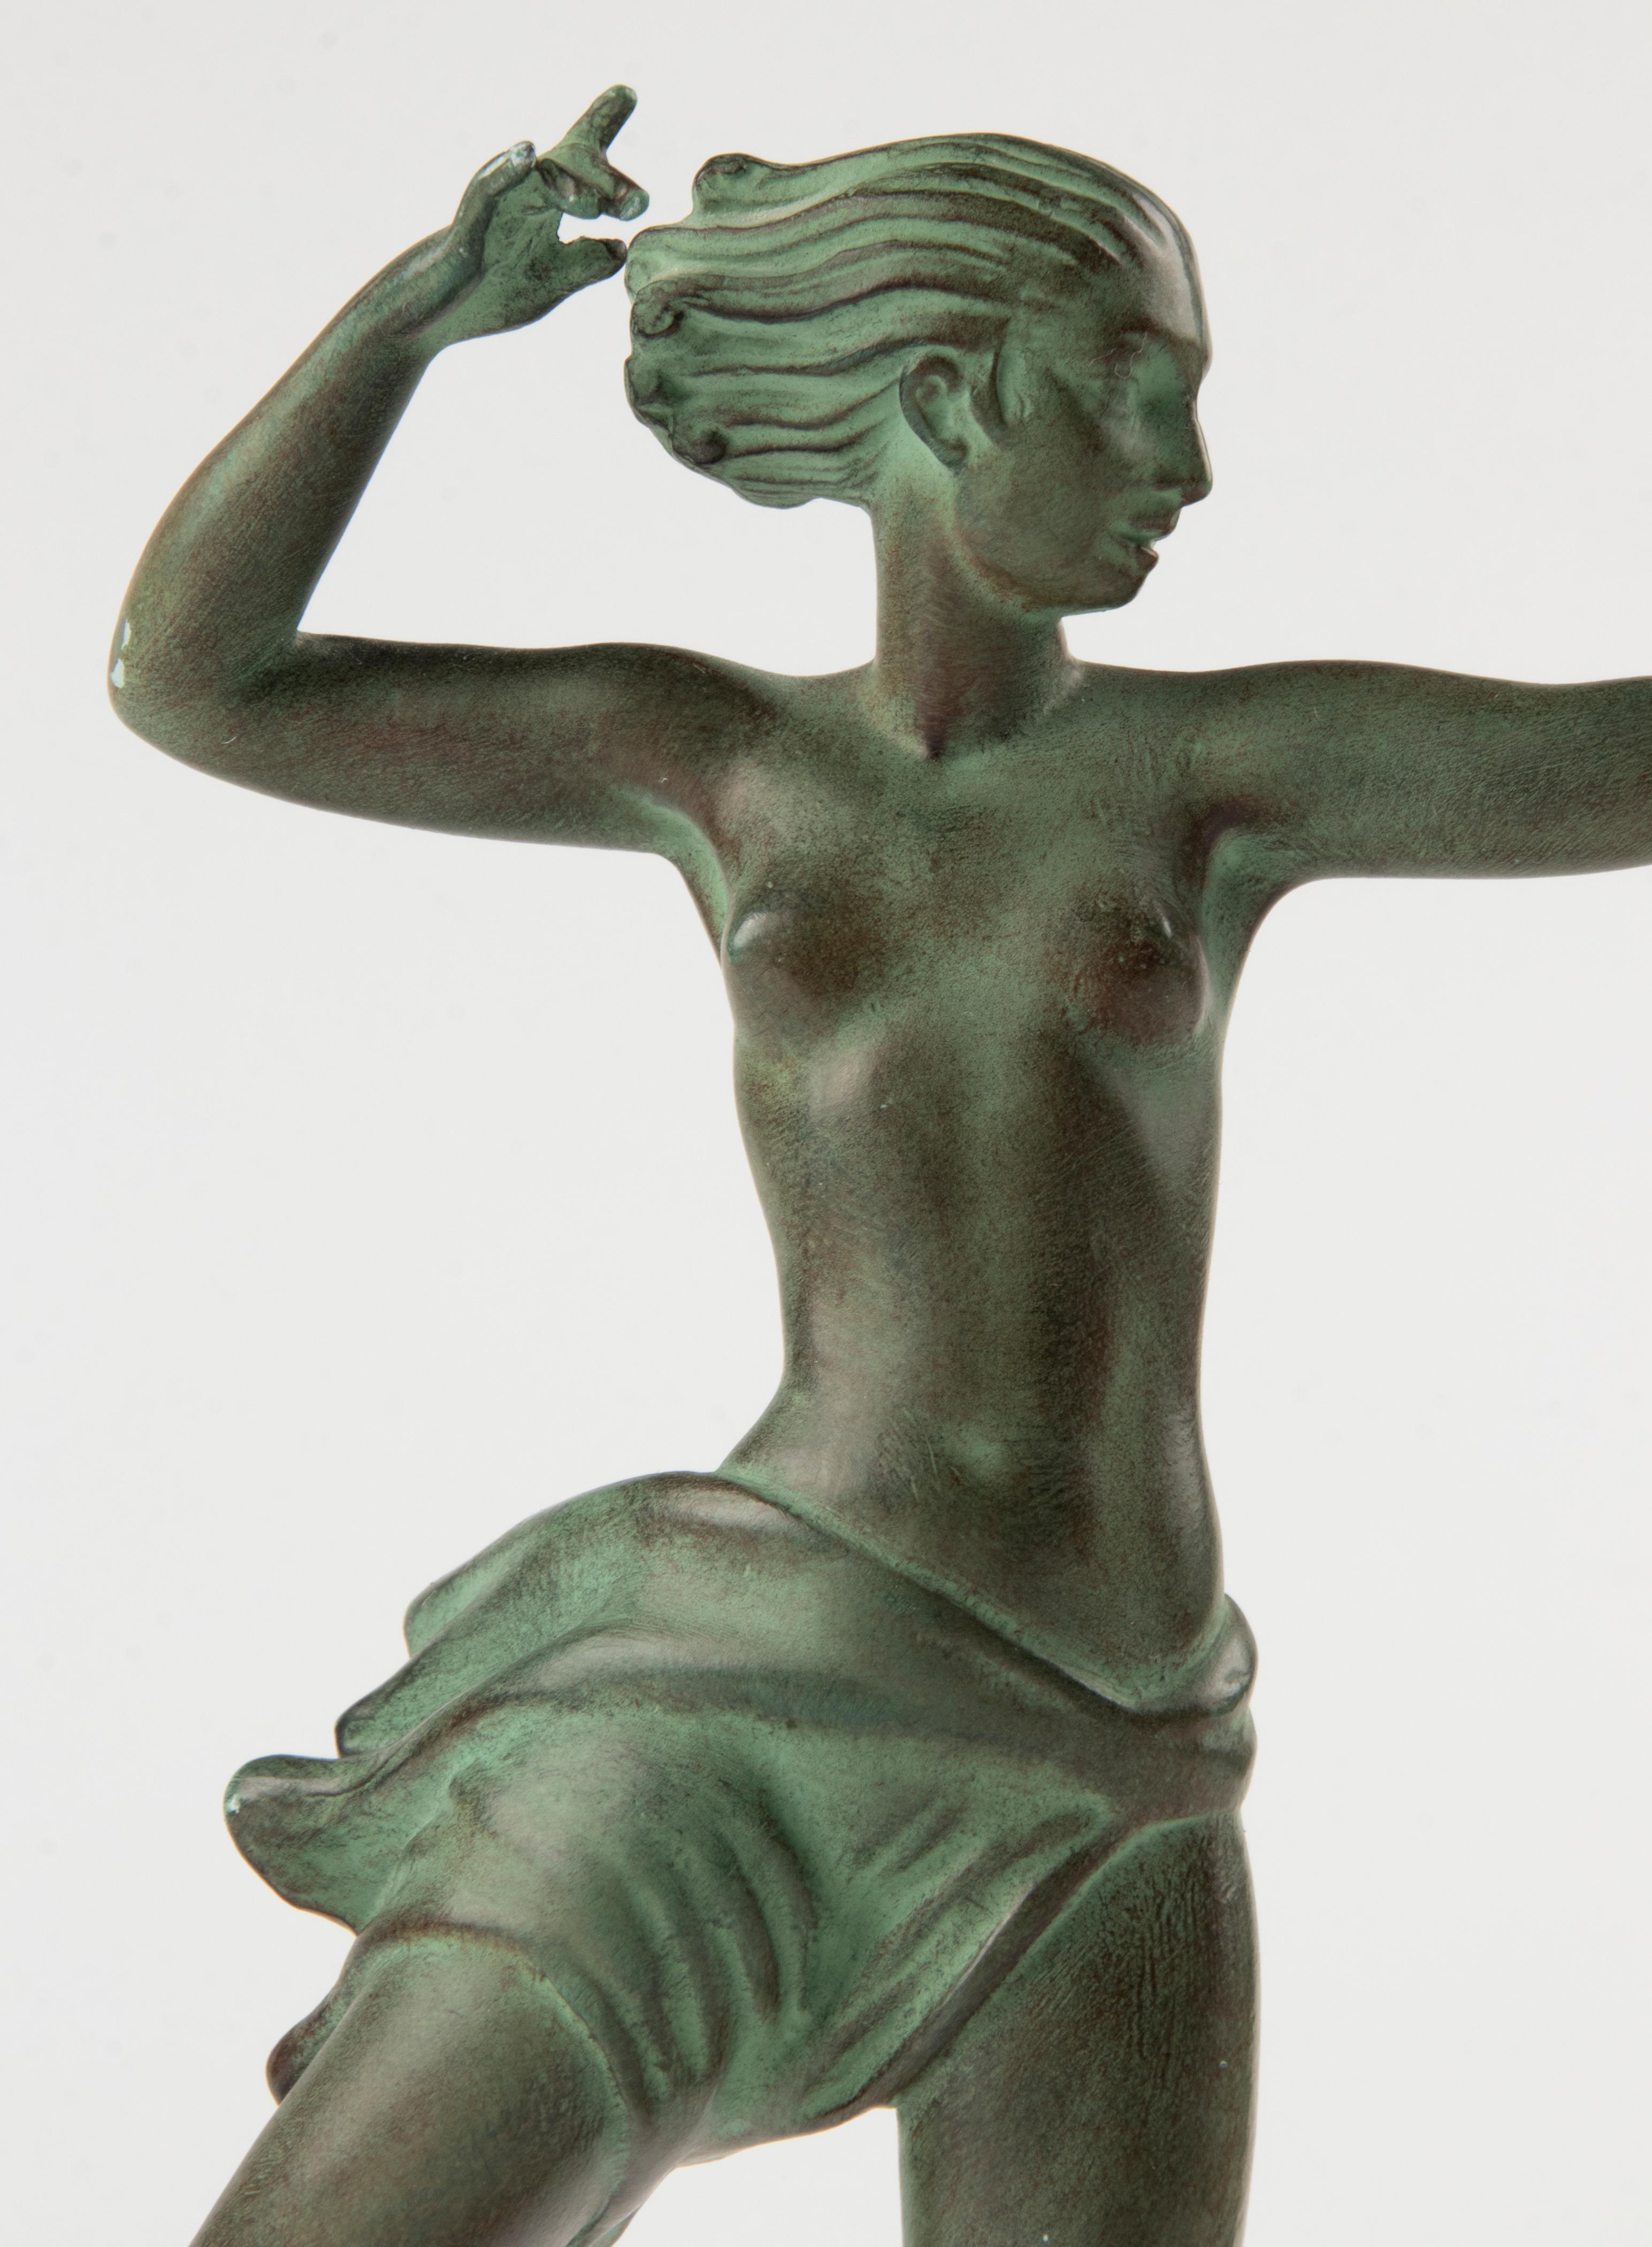 Spelter 1930's French Art Deco Sculpture by Jean de MarCo from Studio Max Le Verrier